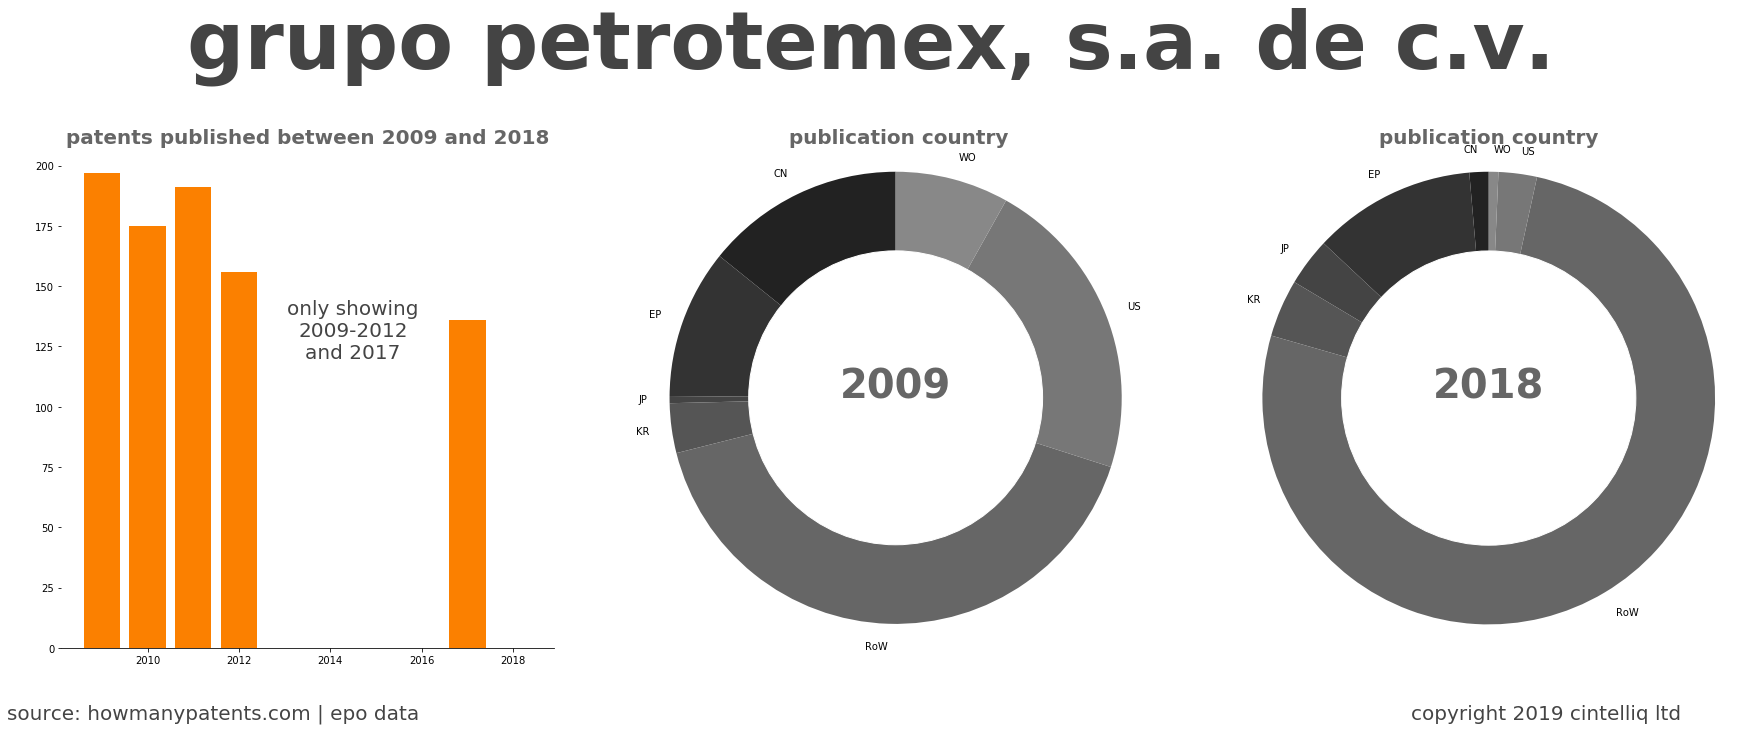 summary of patents for Grupo Petrotemex, S.A. De C.V.